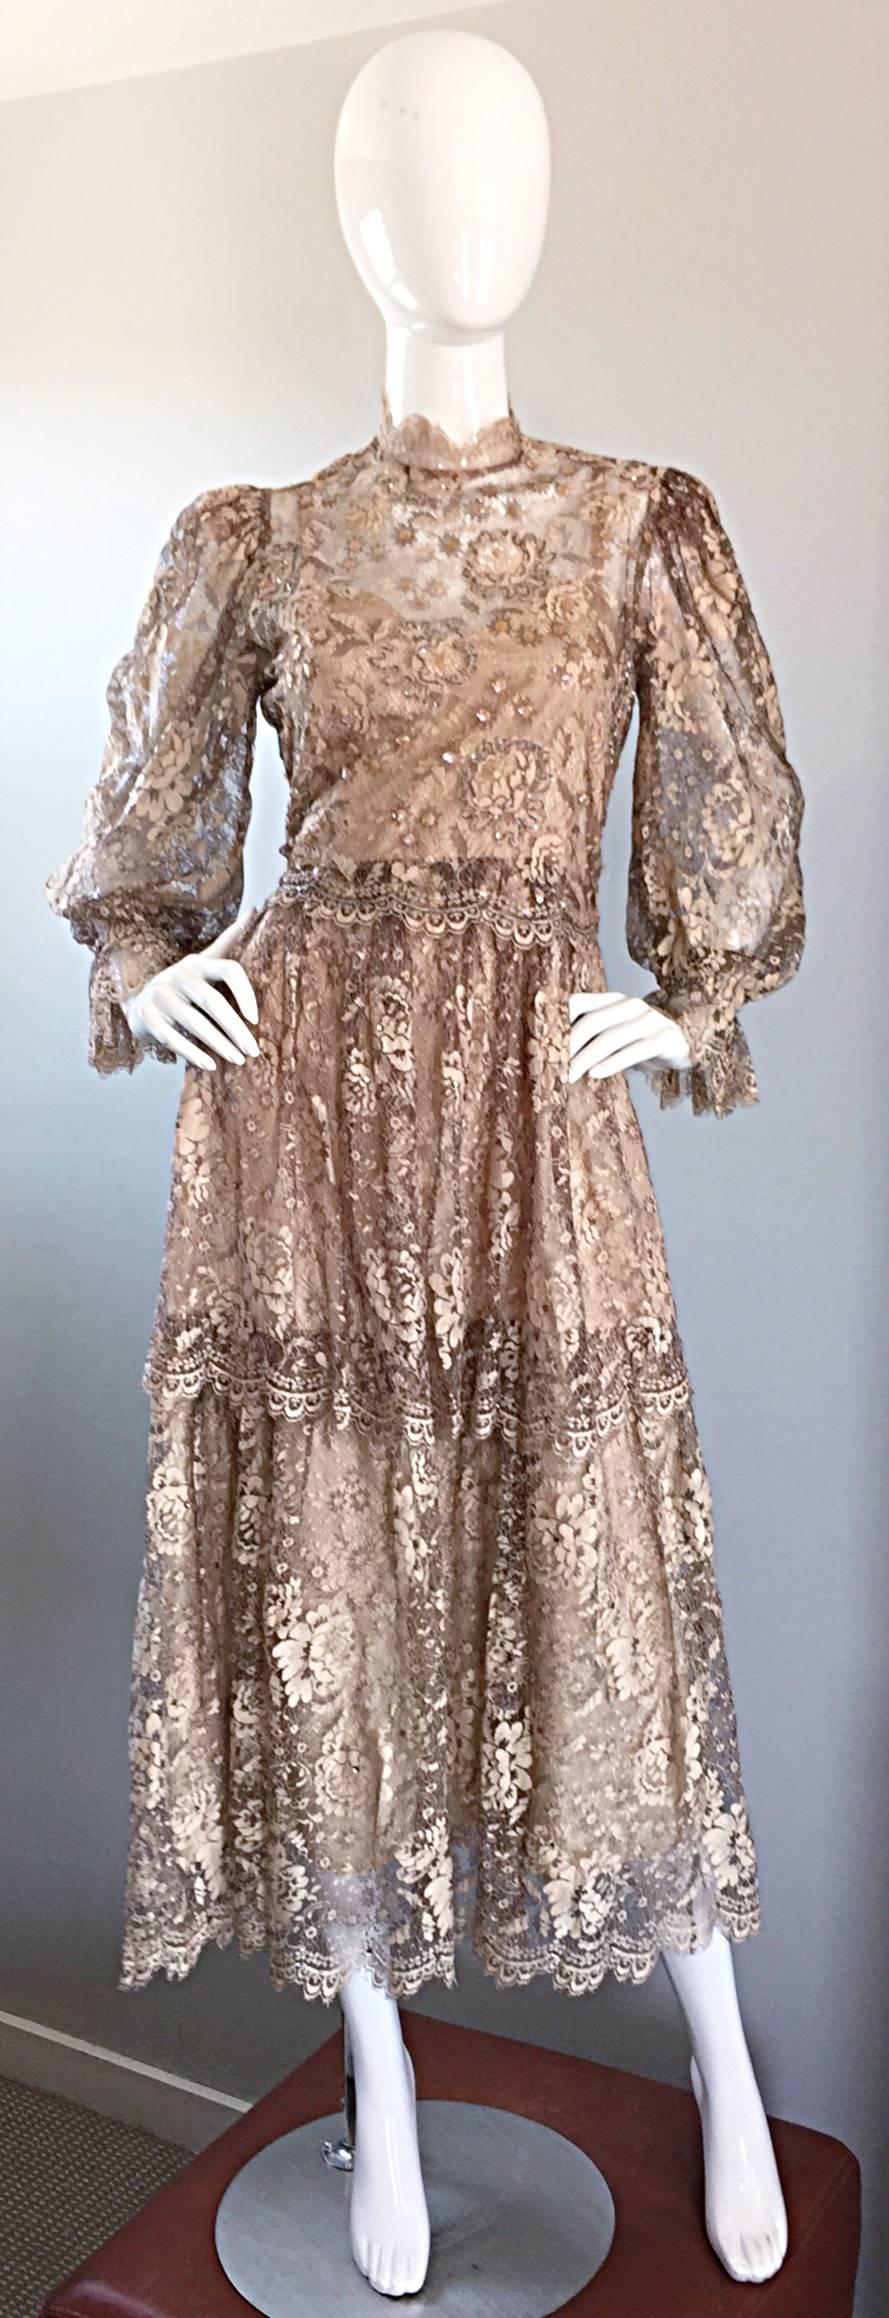 Incredible vintage RINA DI MONTELLA taupe silk French lace taupe Victorian inspired dress and blouse! Sleeveless dress, with a chic boho blouse to be worn over. The entire dress and blouse are encrusted with sequins throughout. Full metal zipper up